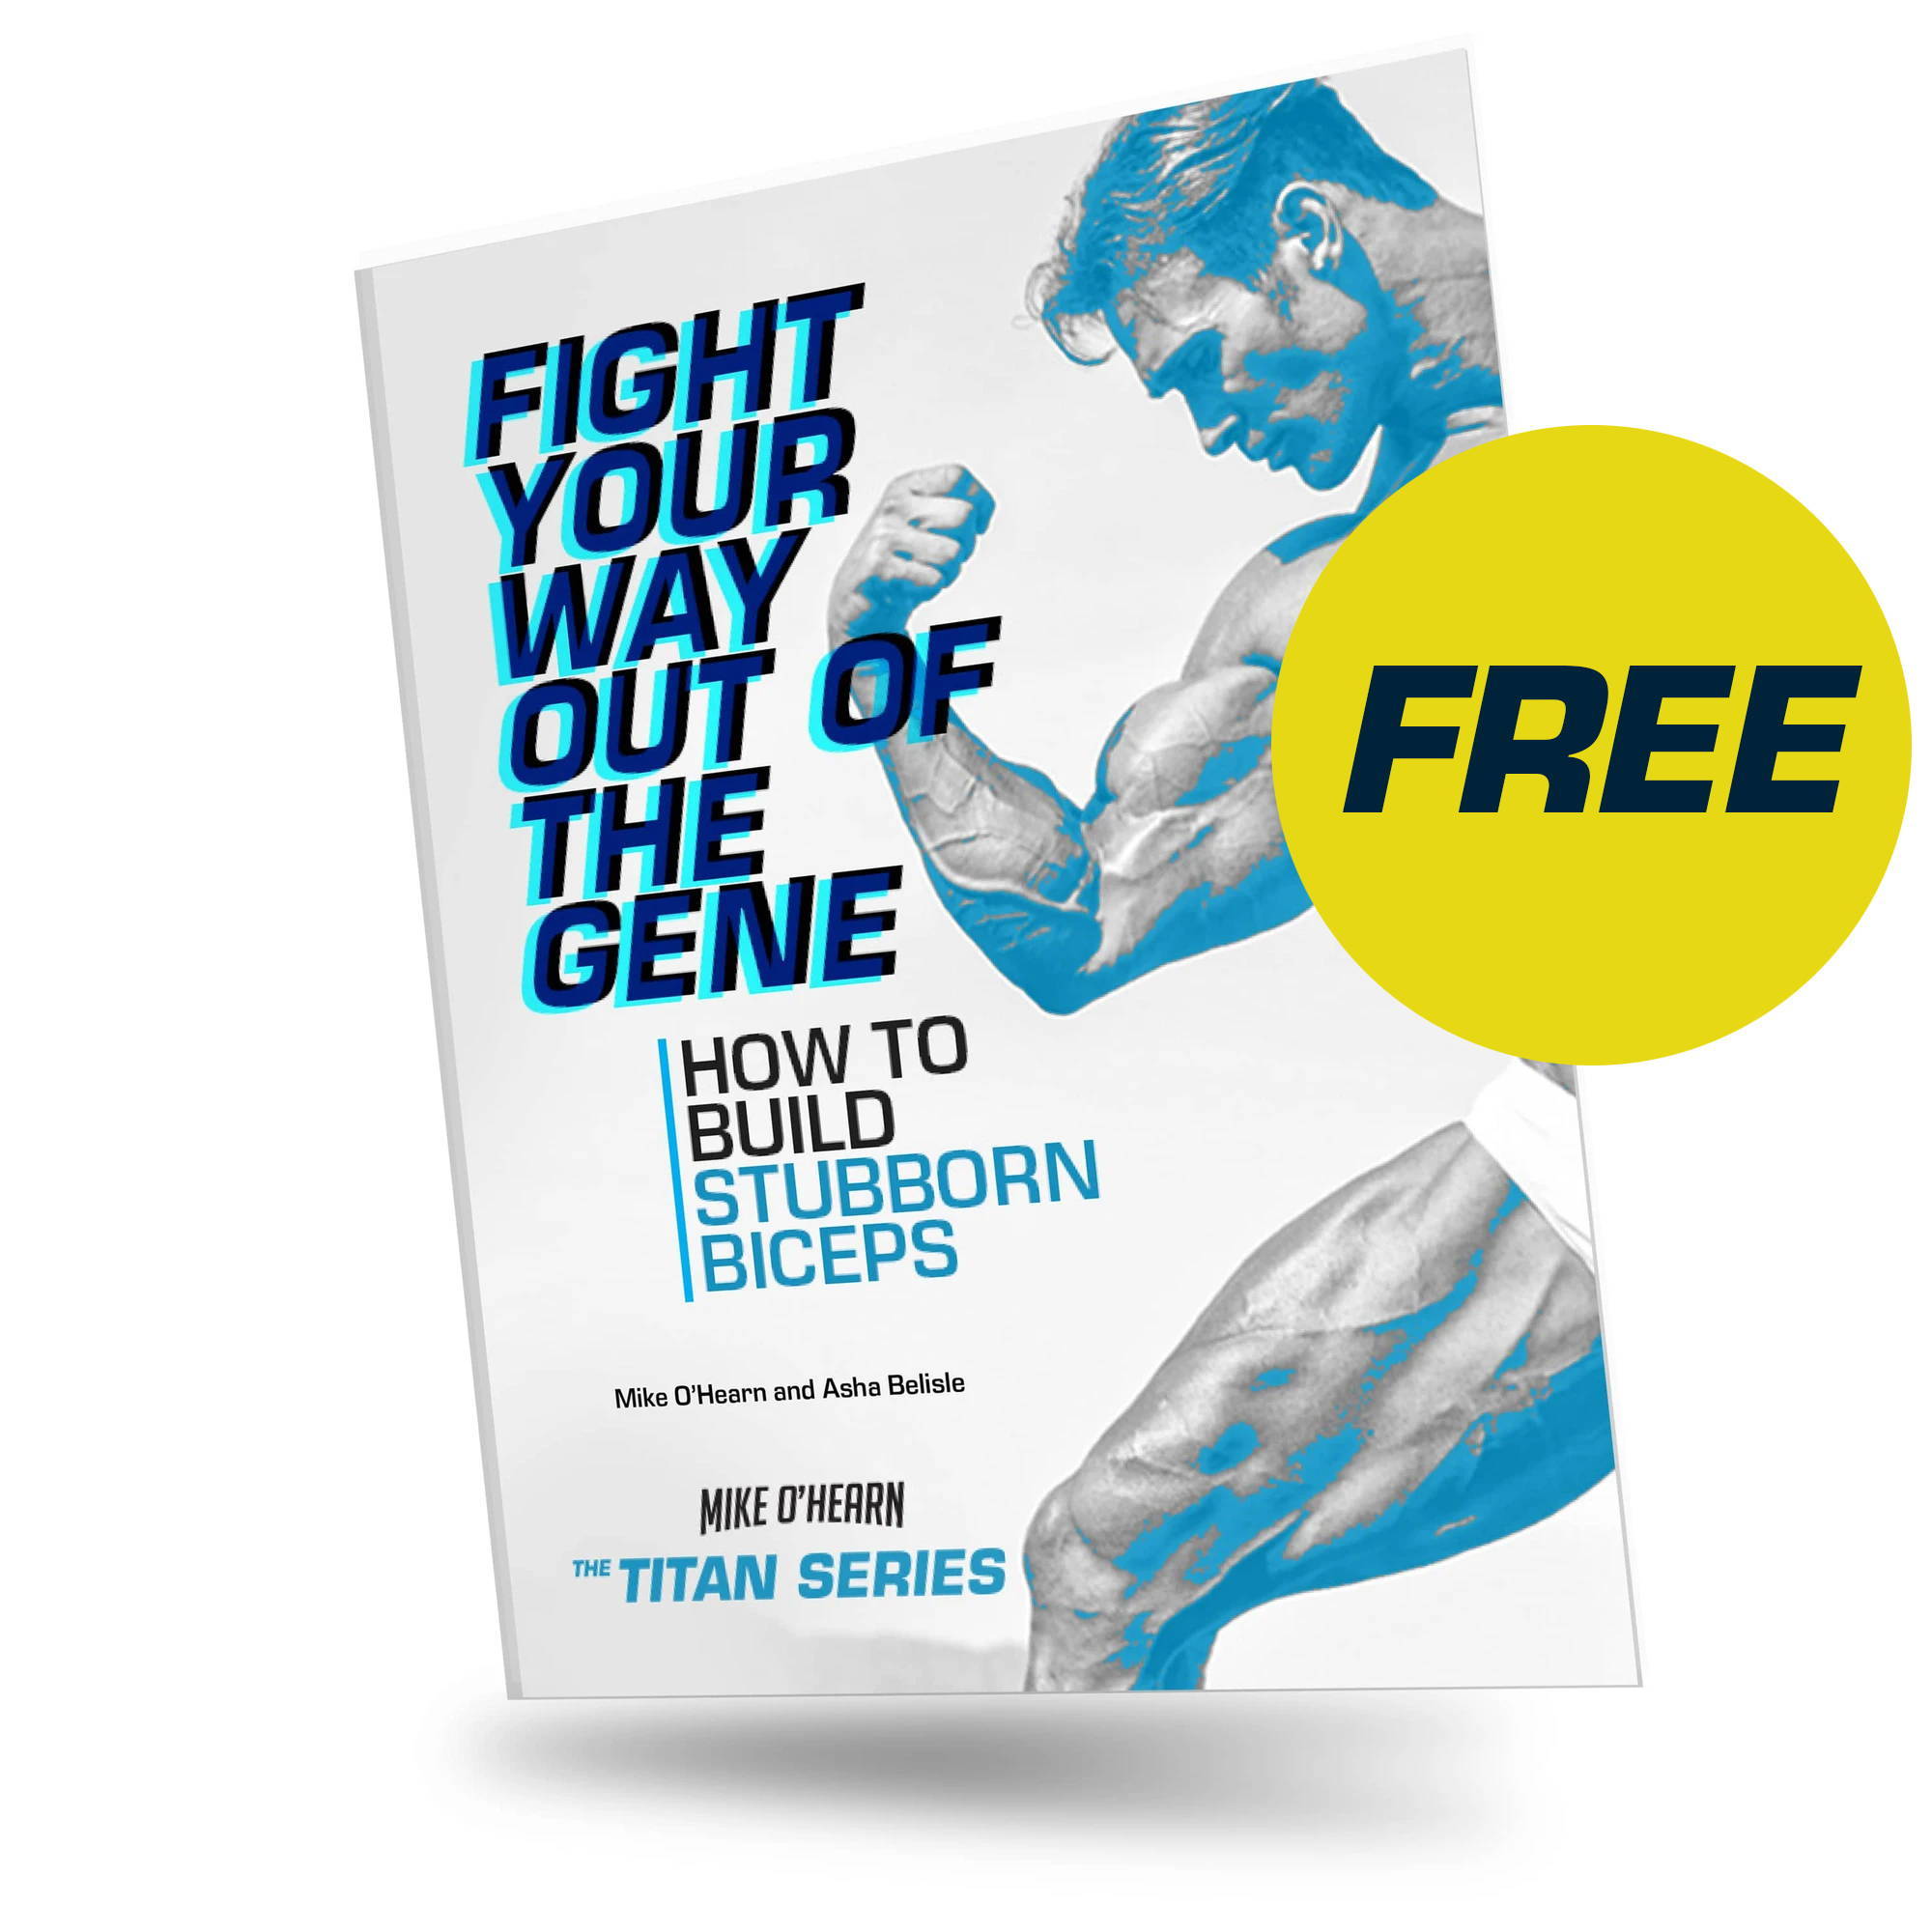 Fight your way out of the gene book by Mike O'Hearn